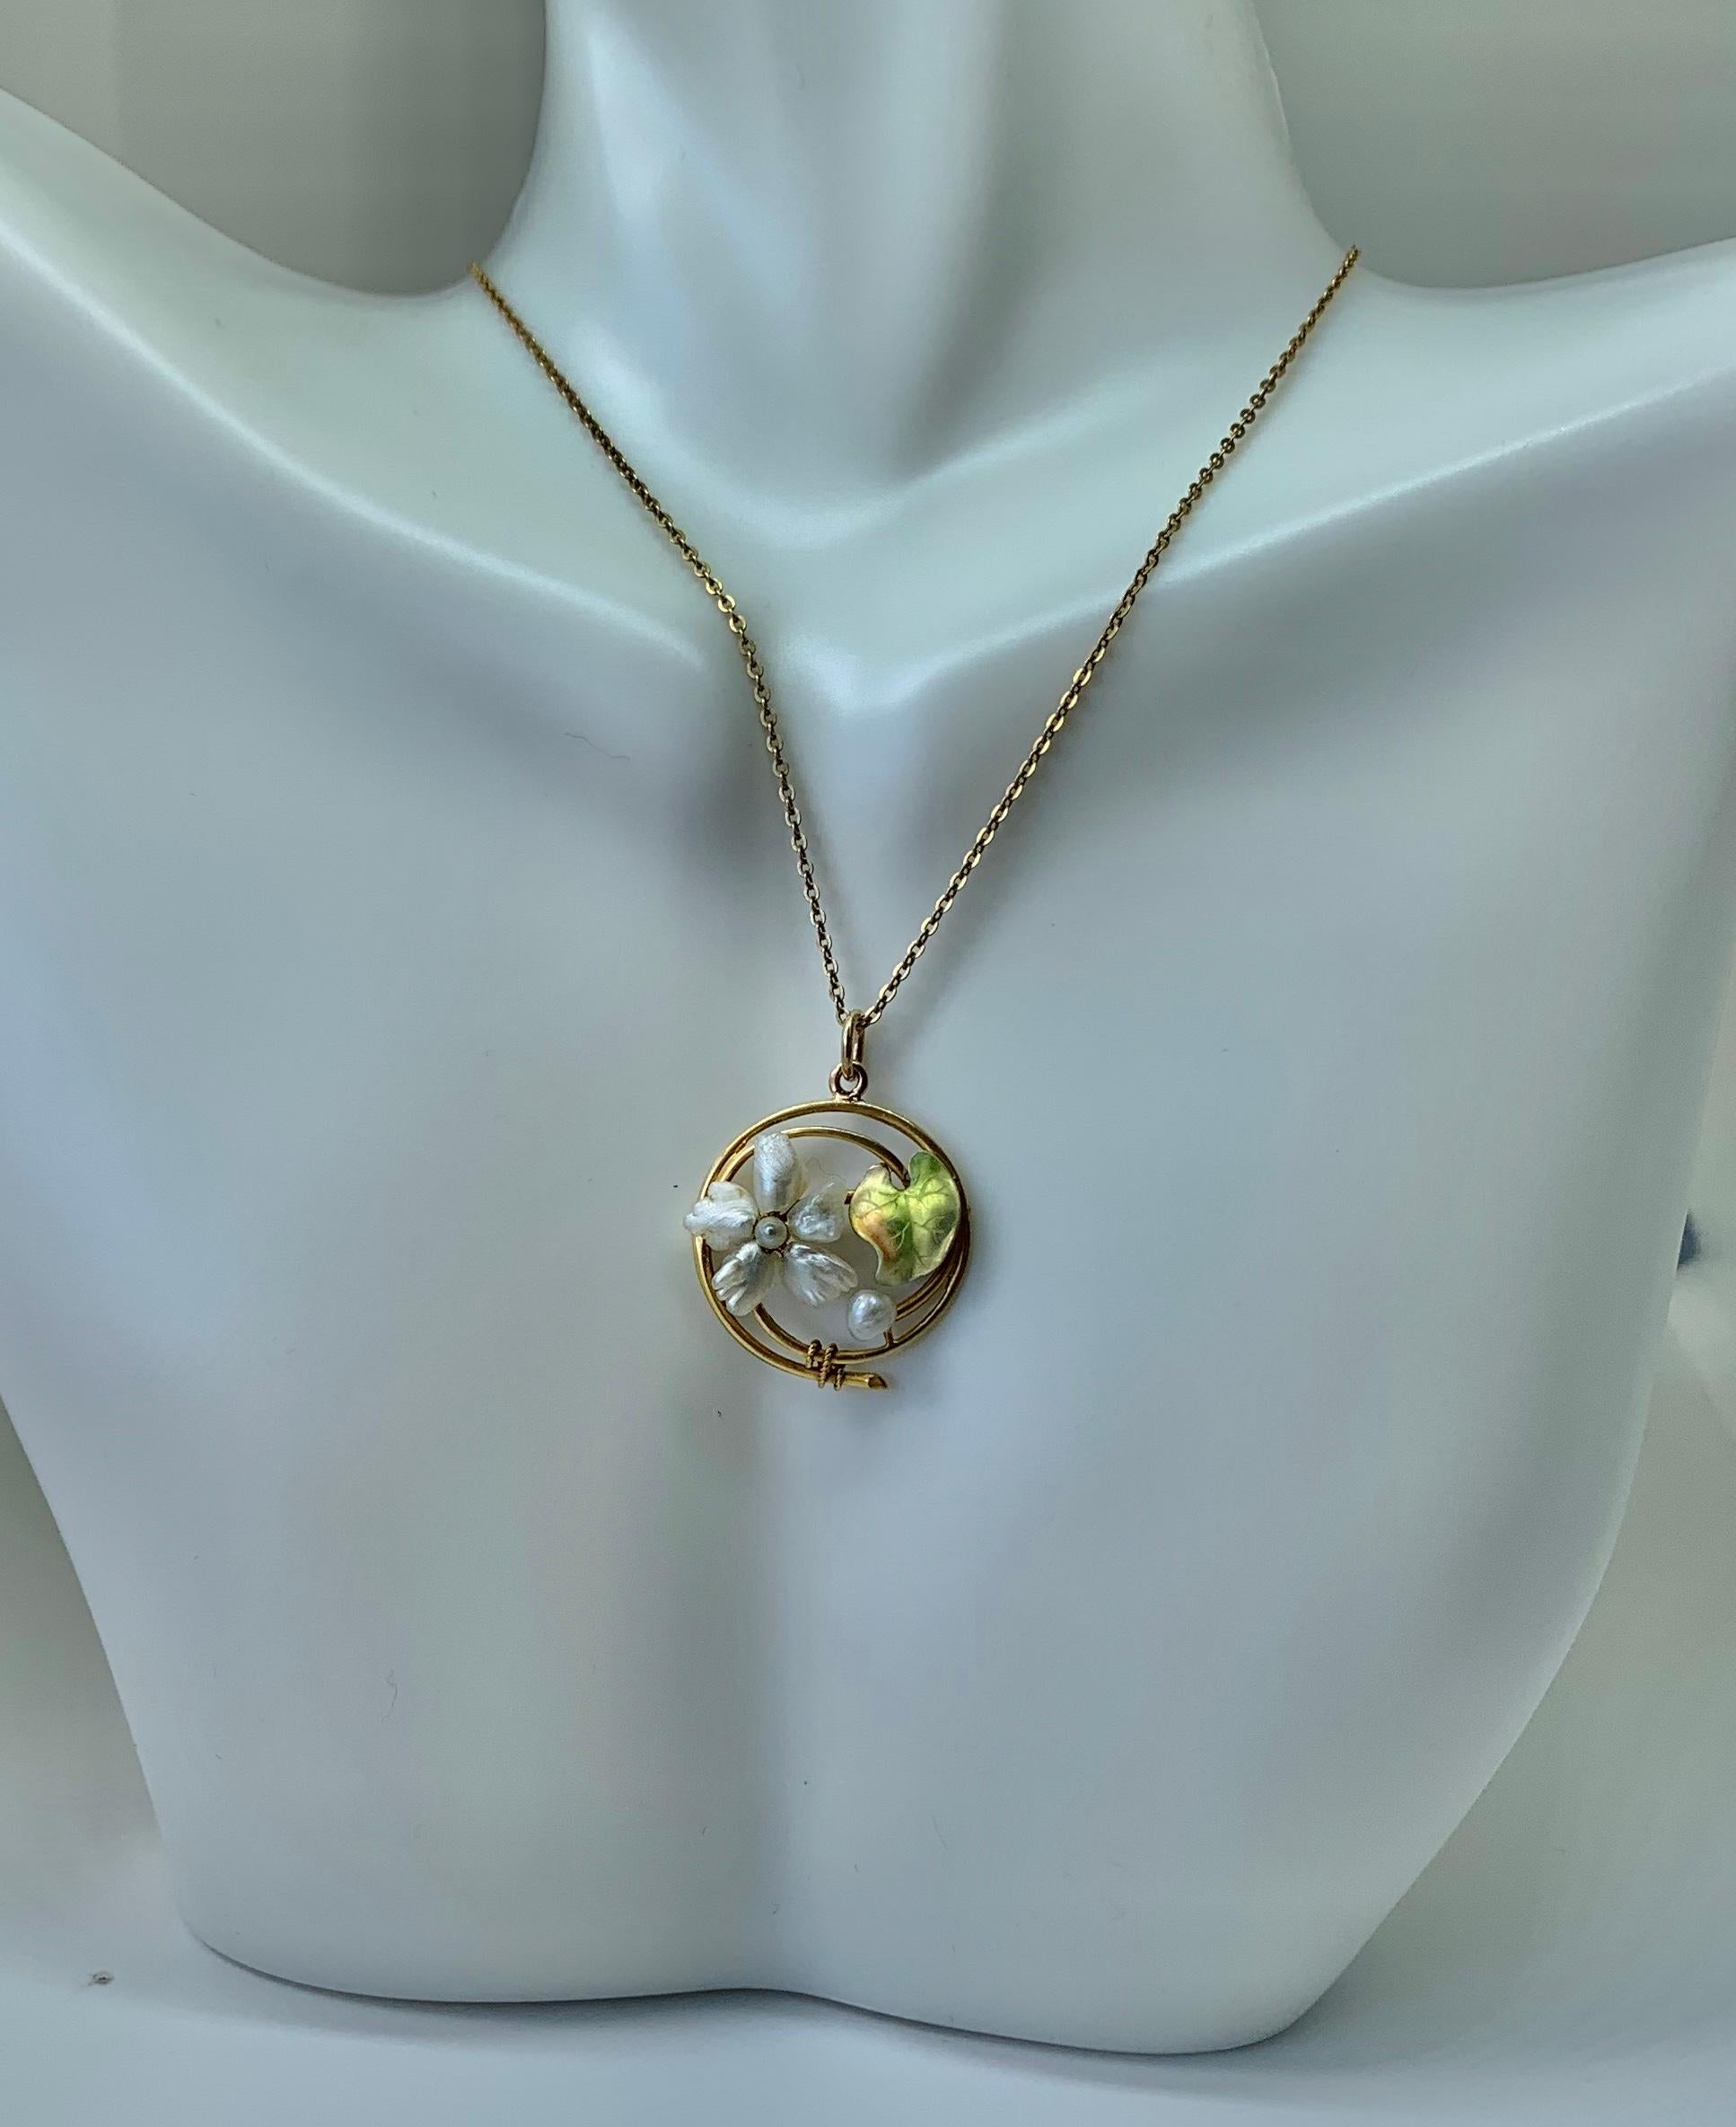 Art Nouveau Flower Lily Pad Enamel Pearl Pendant Lavaliere Necklace 14K Gold In Excellent Condition For Sale In New York, NY